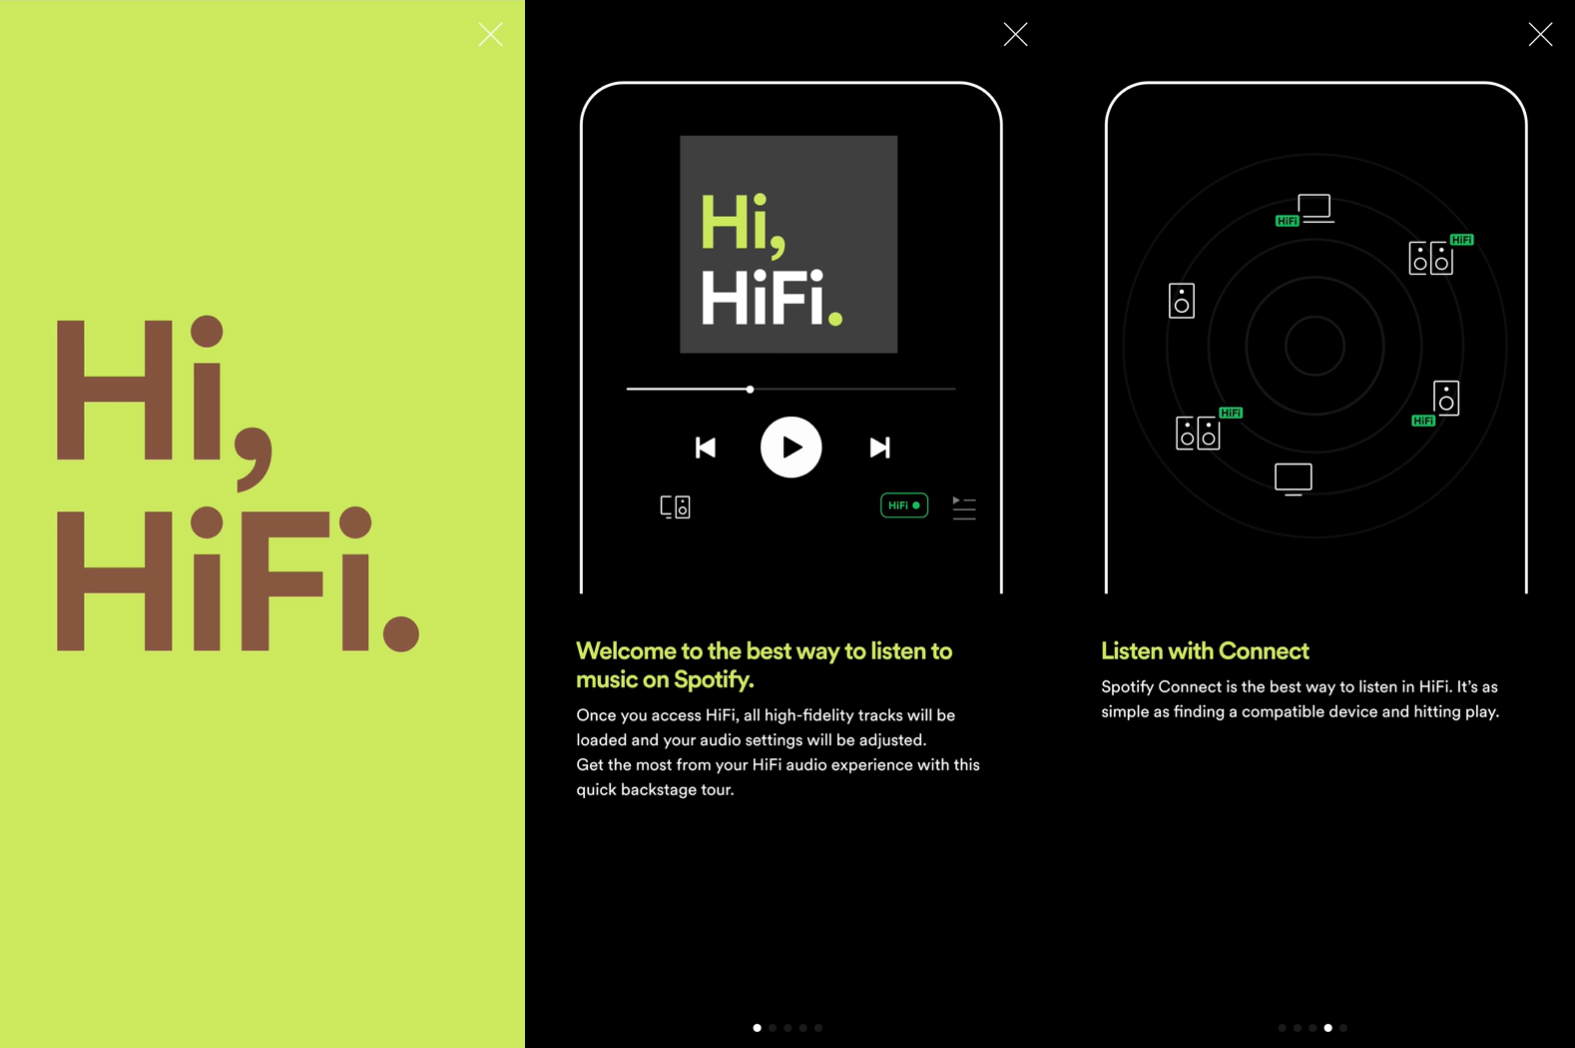 New Spotify HiFi details emerge in the back end of the app